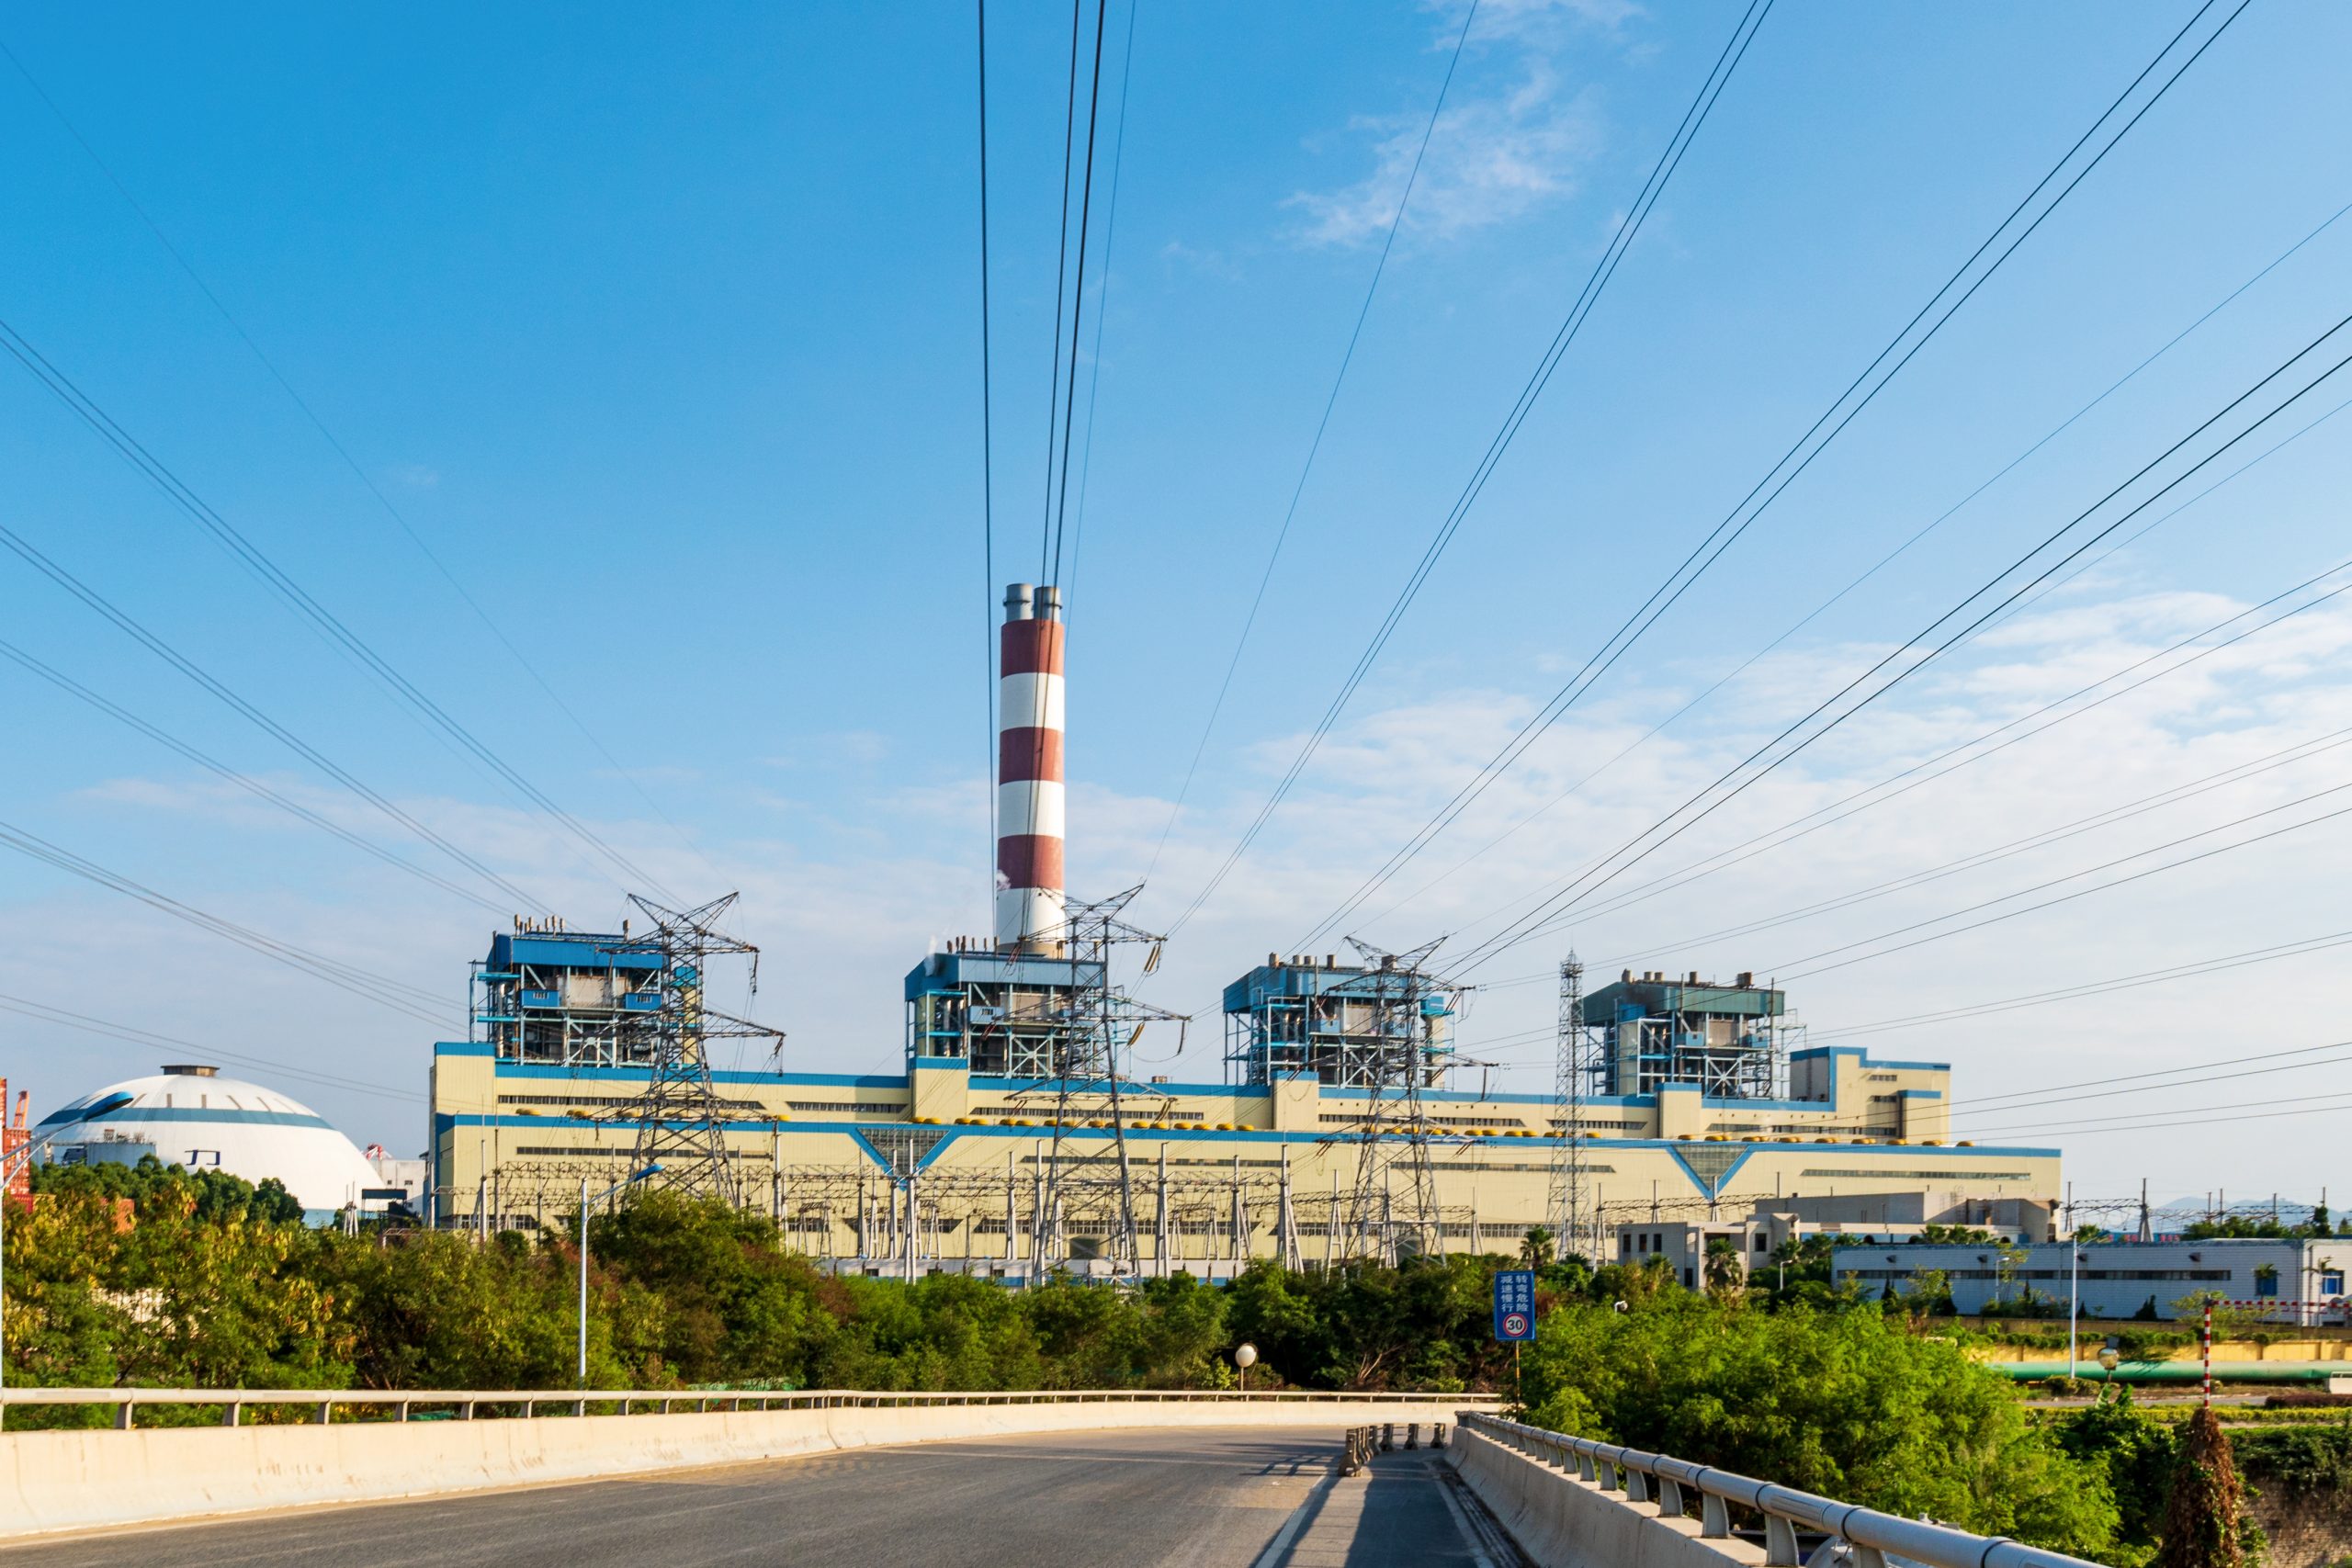 The recent approvals for new coal-fired power projects are phased steps in energy substitution and transition